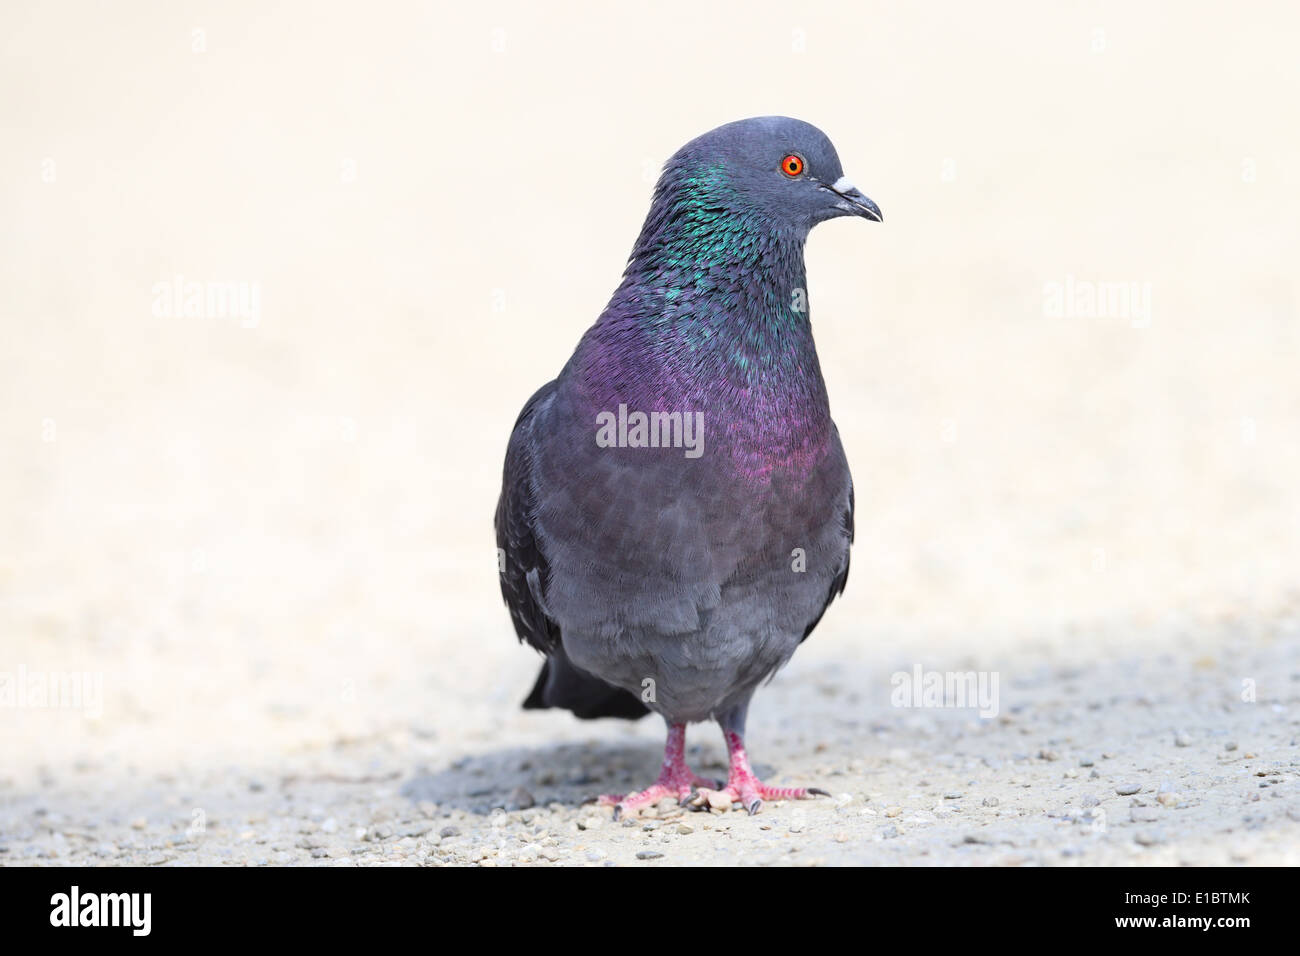 male feral pigeon standing on gravel urban alley Stock Photo